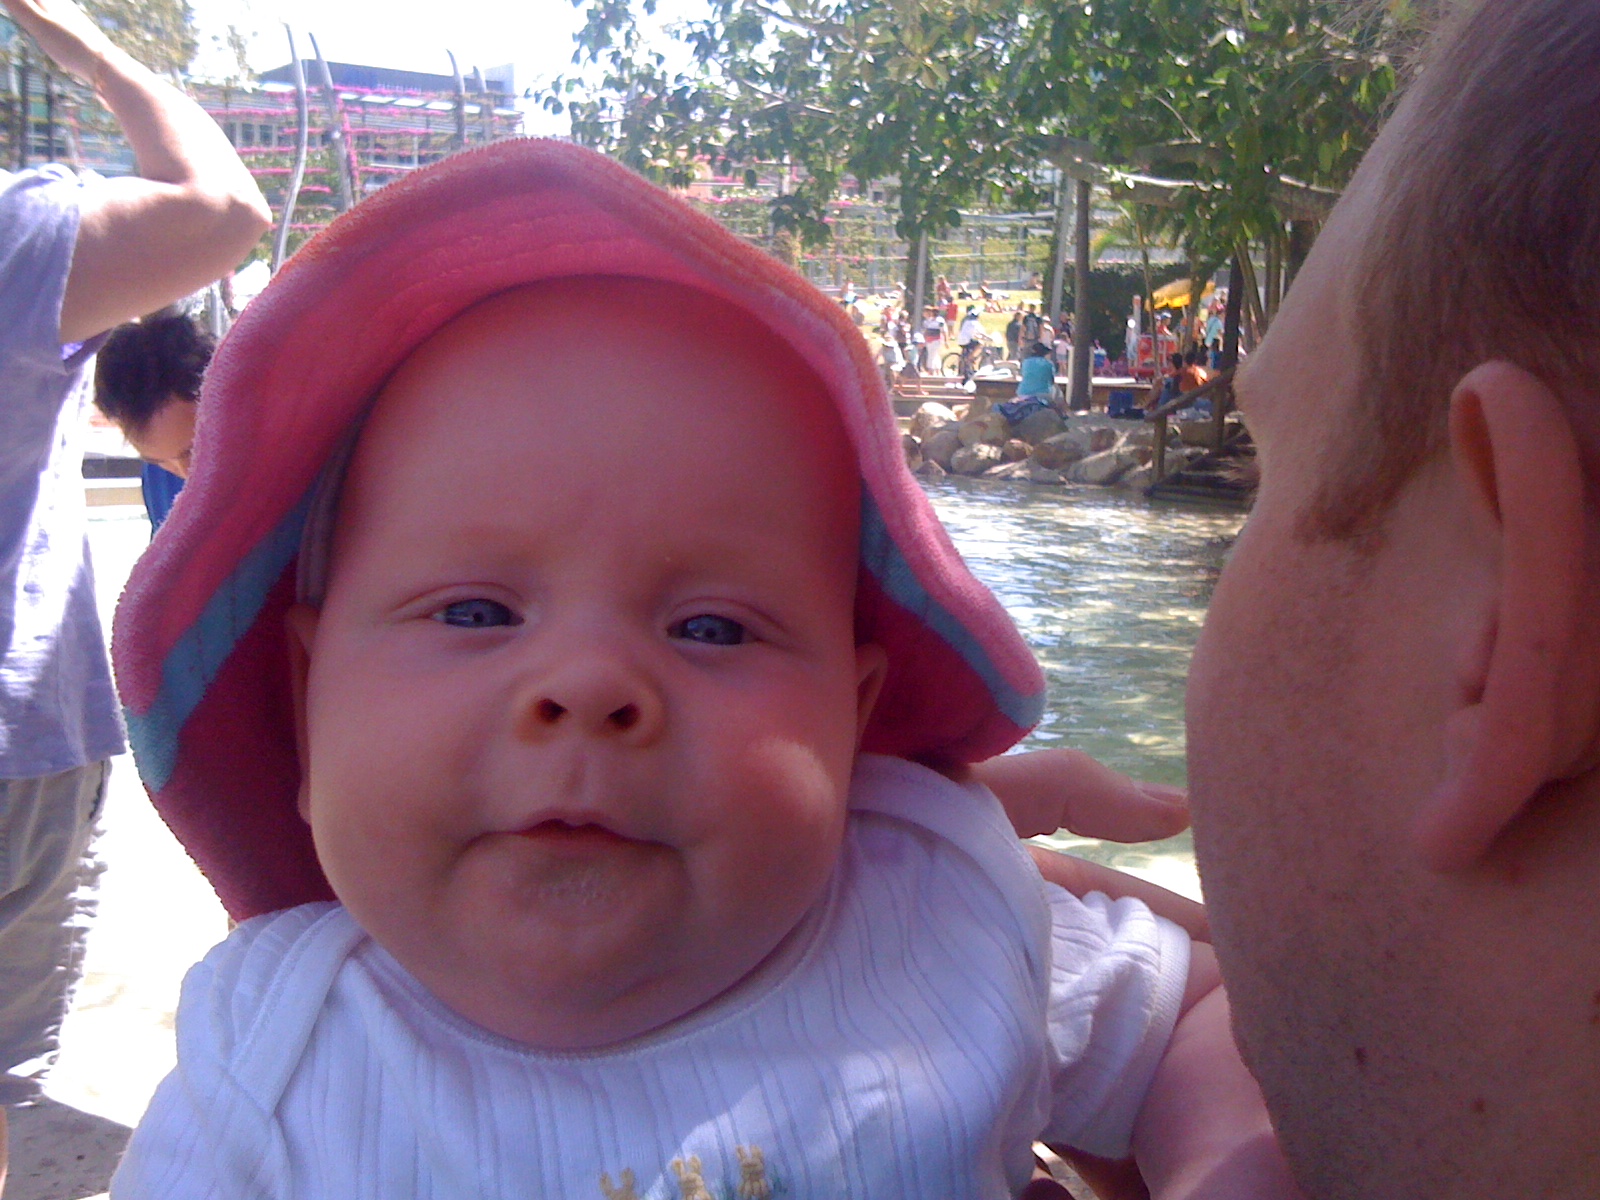 You at the waterpark. 14 weeks old?